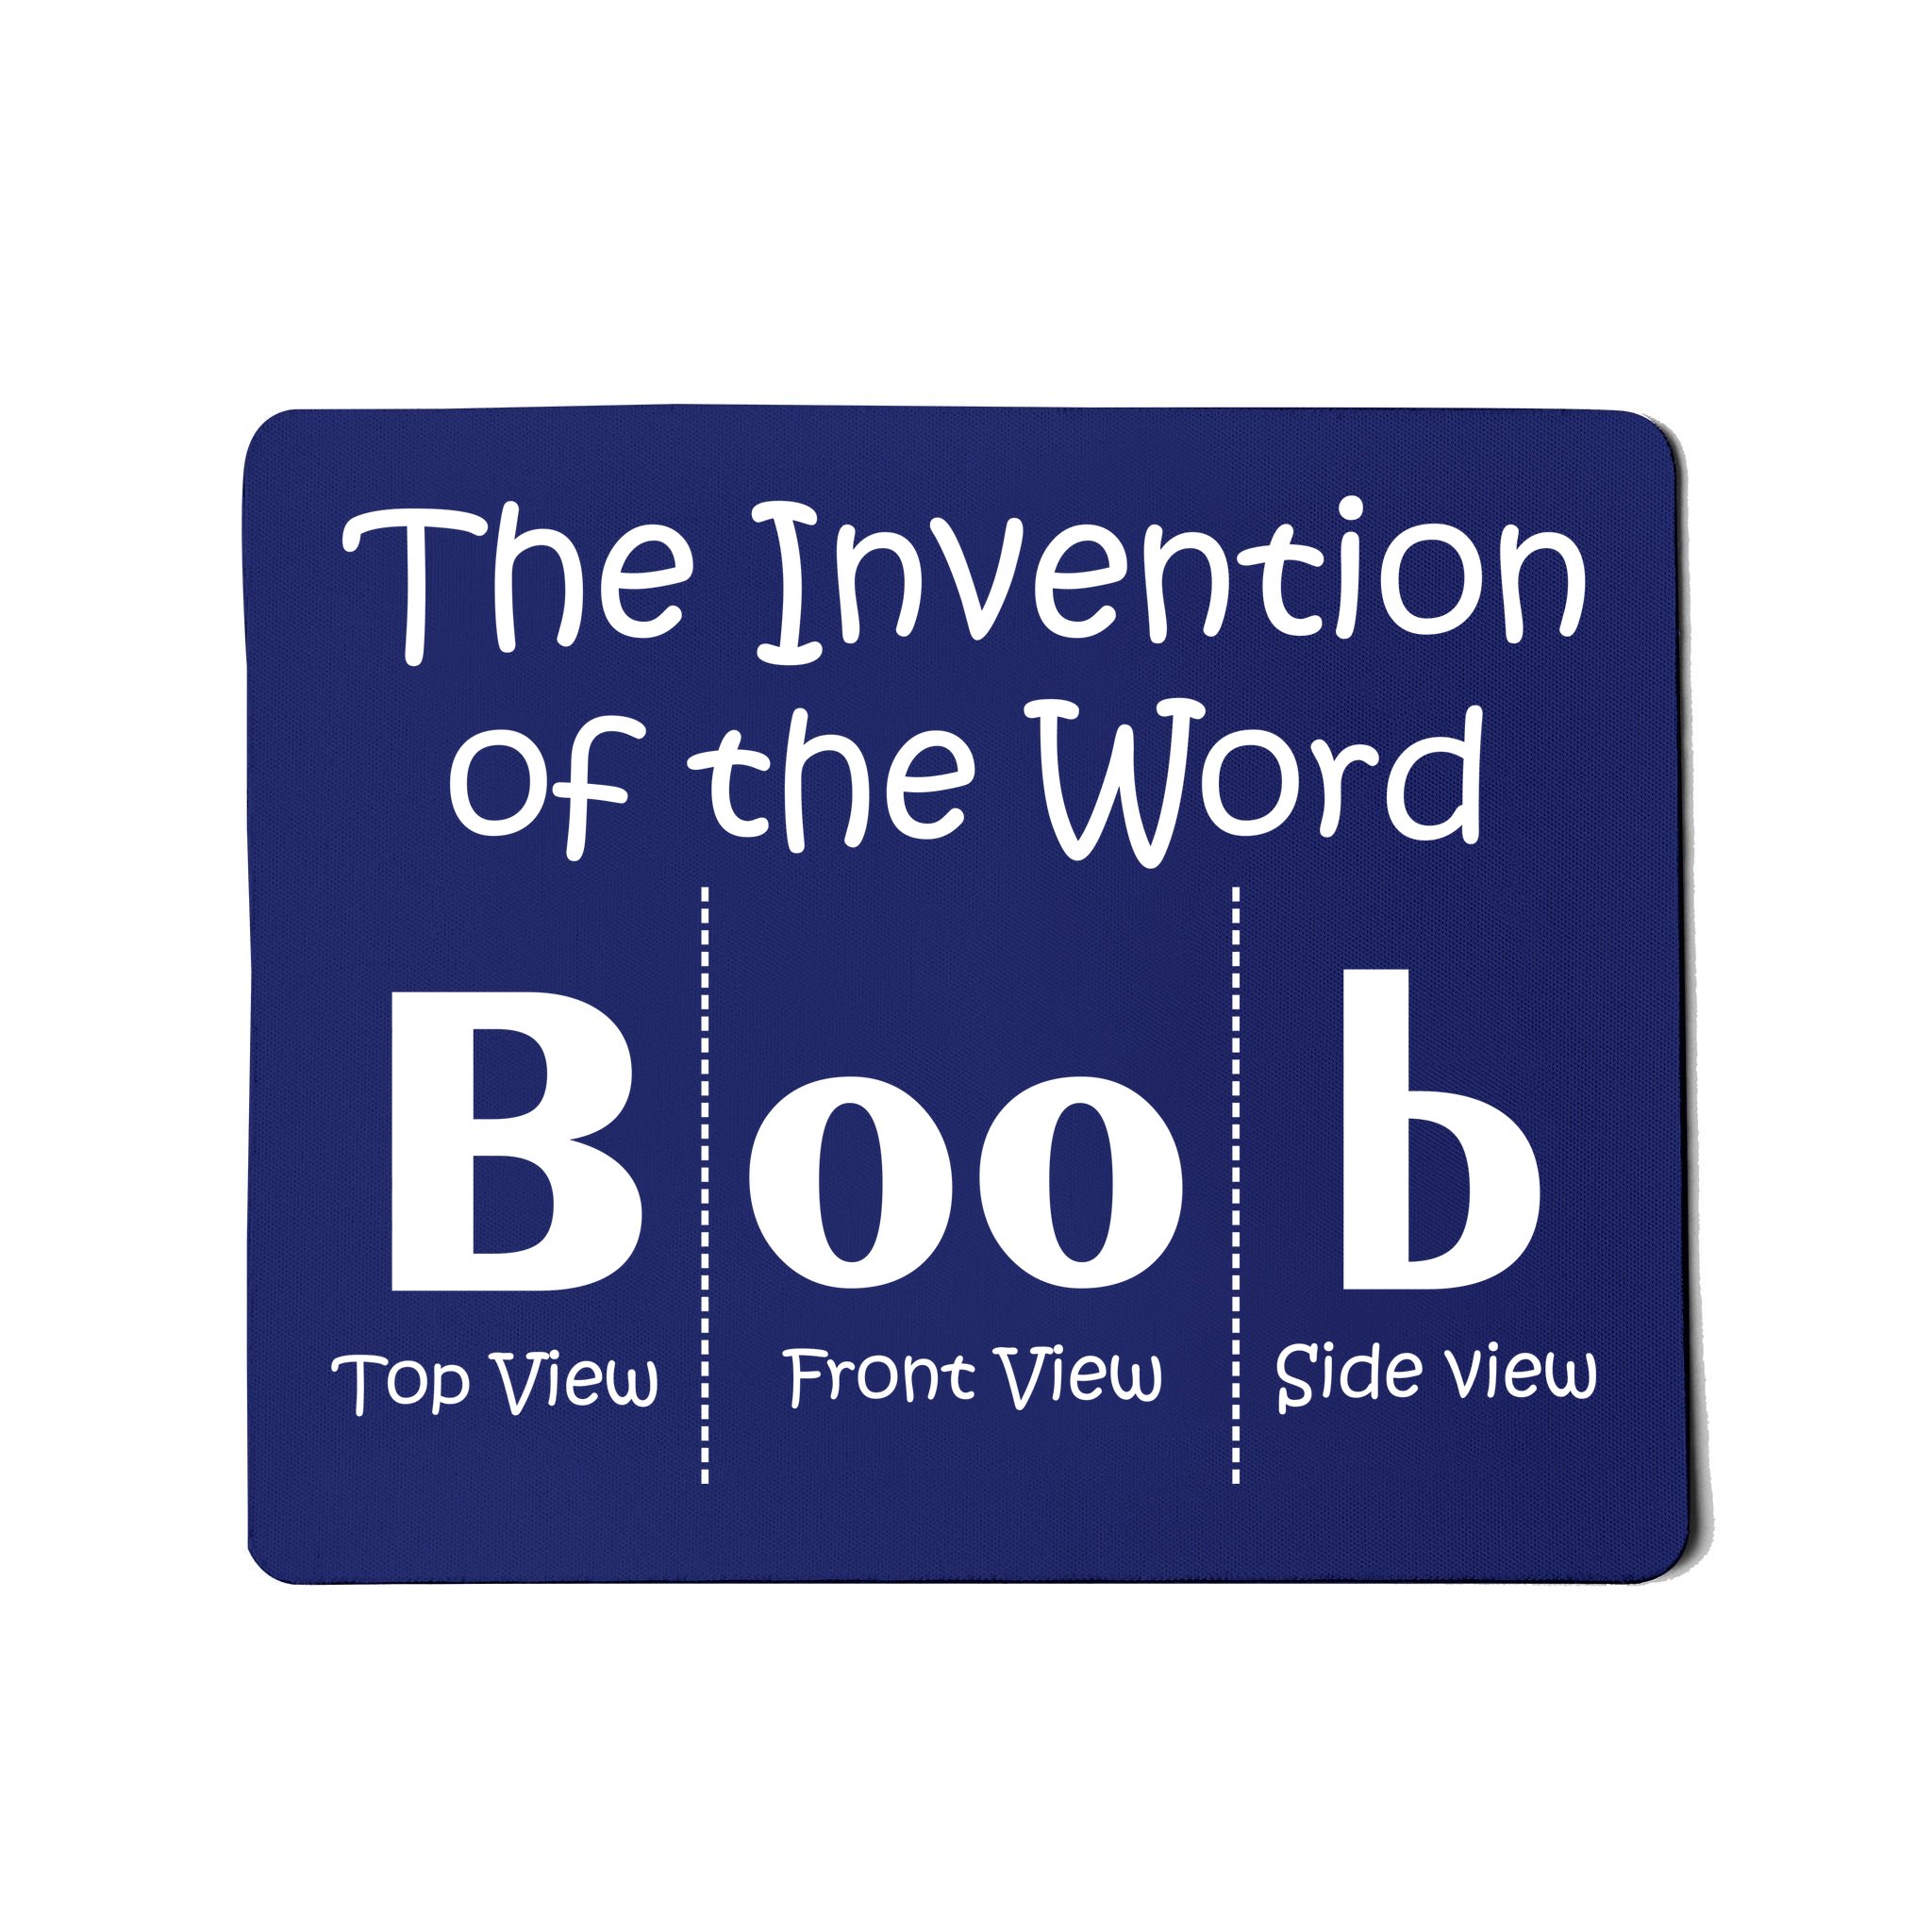 https://images3.teeshirtpalace.com/images/productImages/invention-of-the-word-boob--navy-msp-garment.jpg